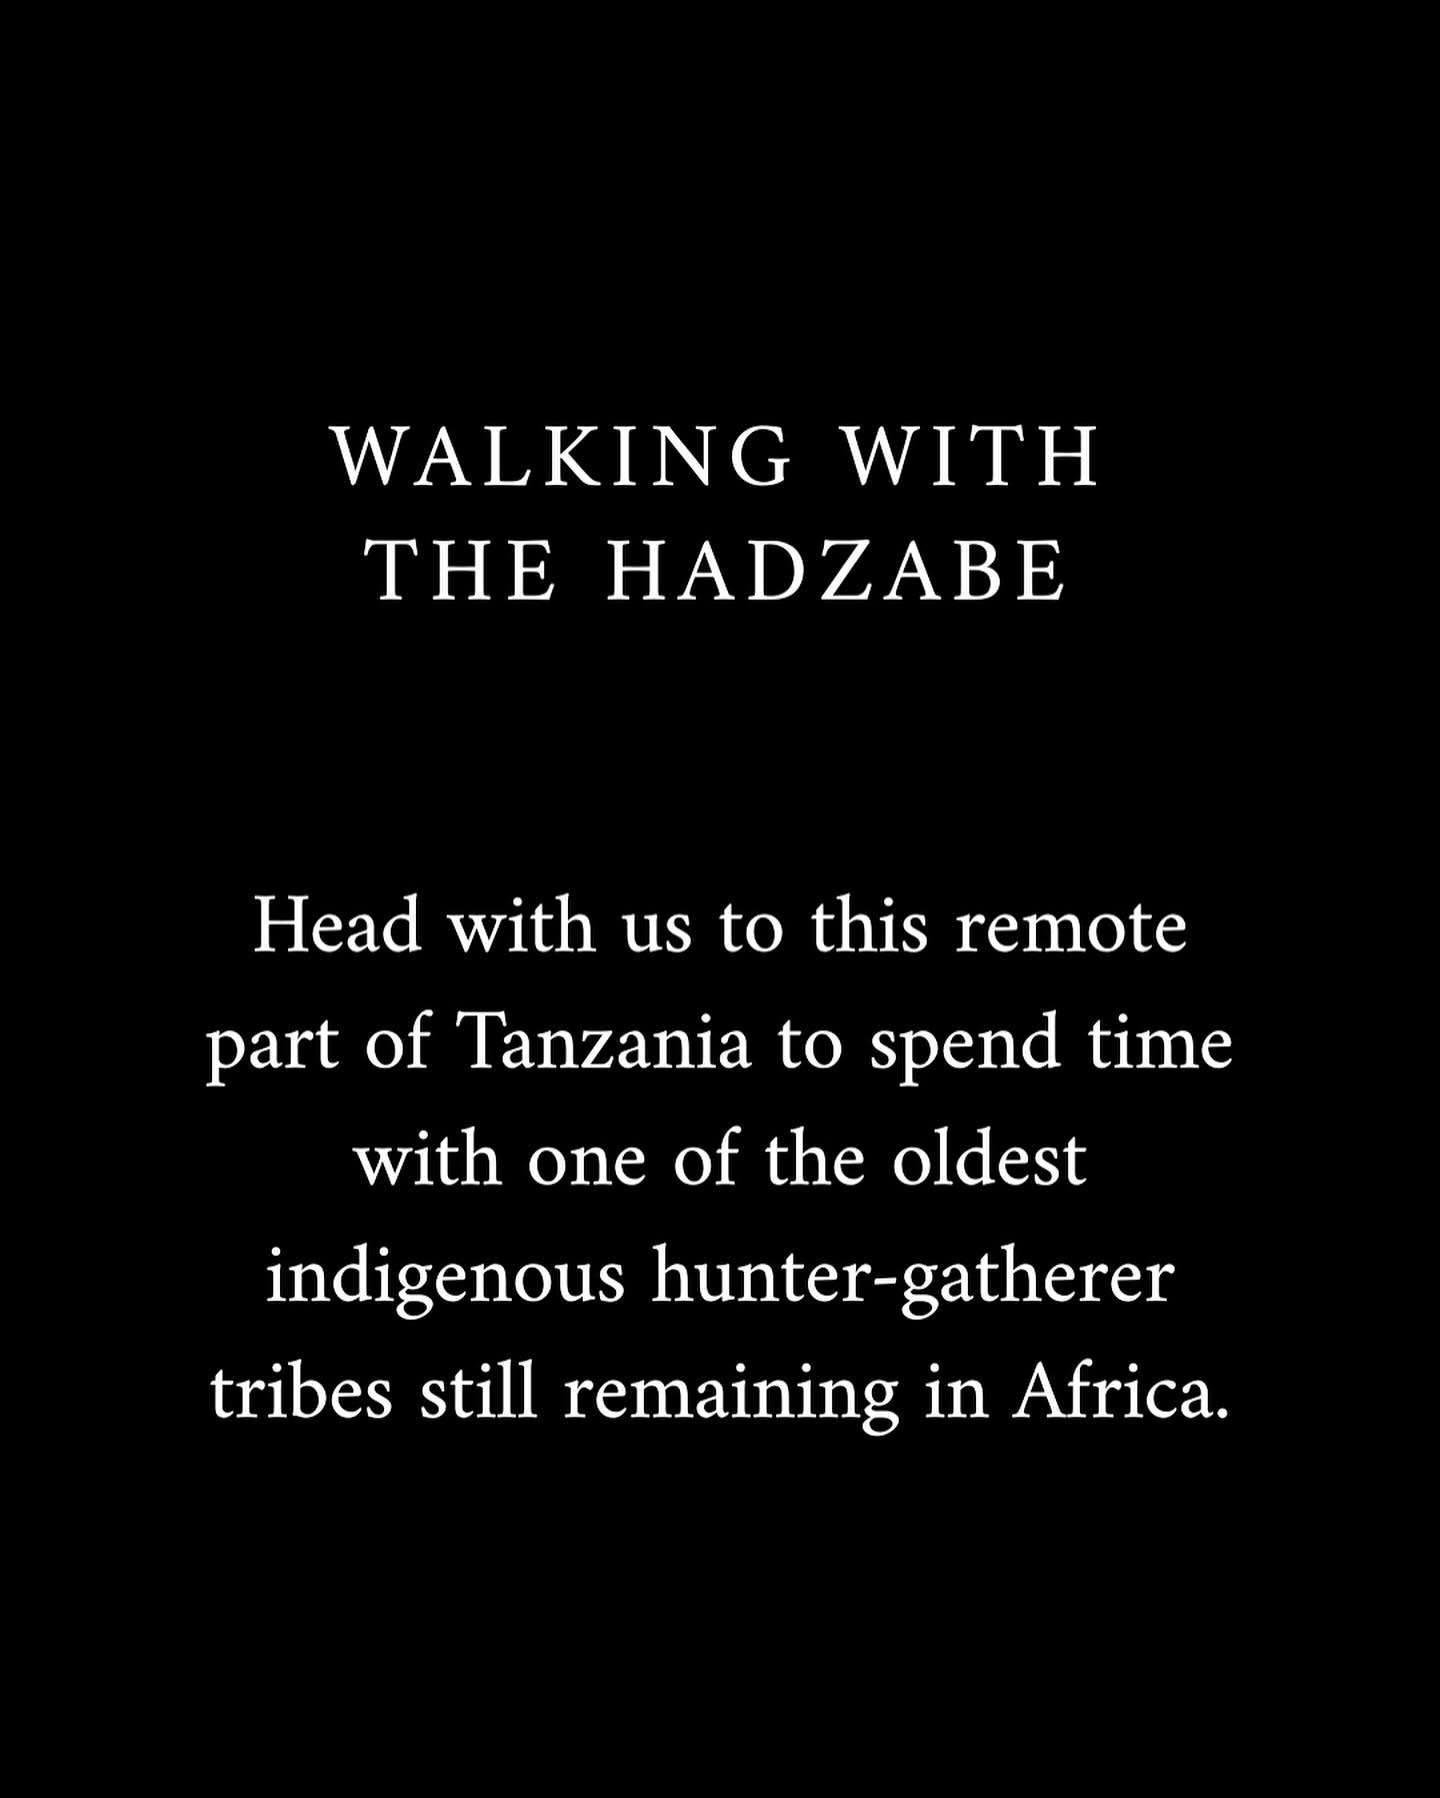 Head with us to visit the Hadzabe hunter-gatherers, a truly educational and eye-opening experience for all ages, old and young alike. 

Contact us on the link in our bio to find out more about this fascinating safari.

#hadzabe 
#huntergatherers
#had